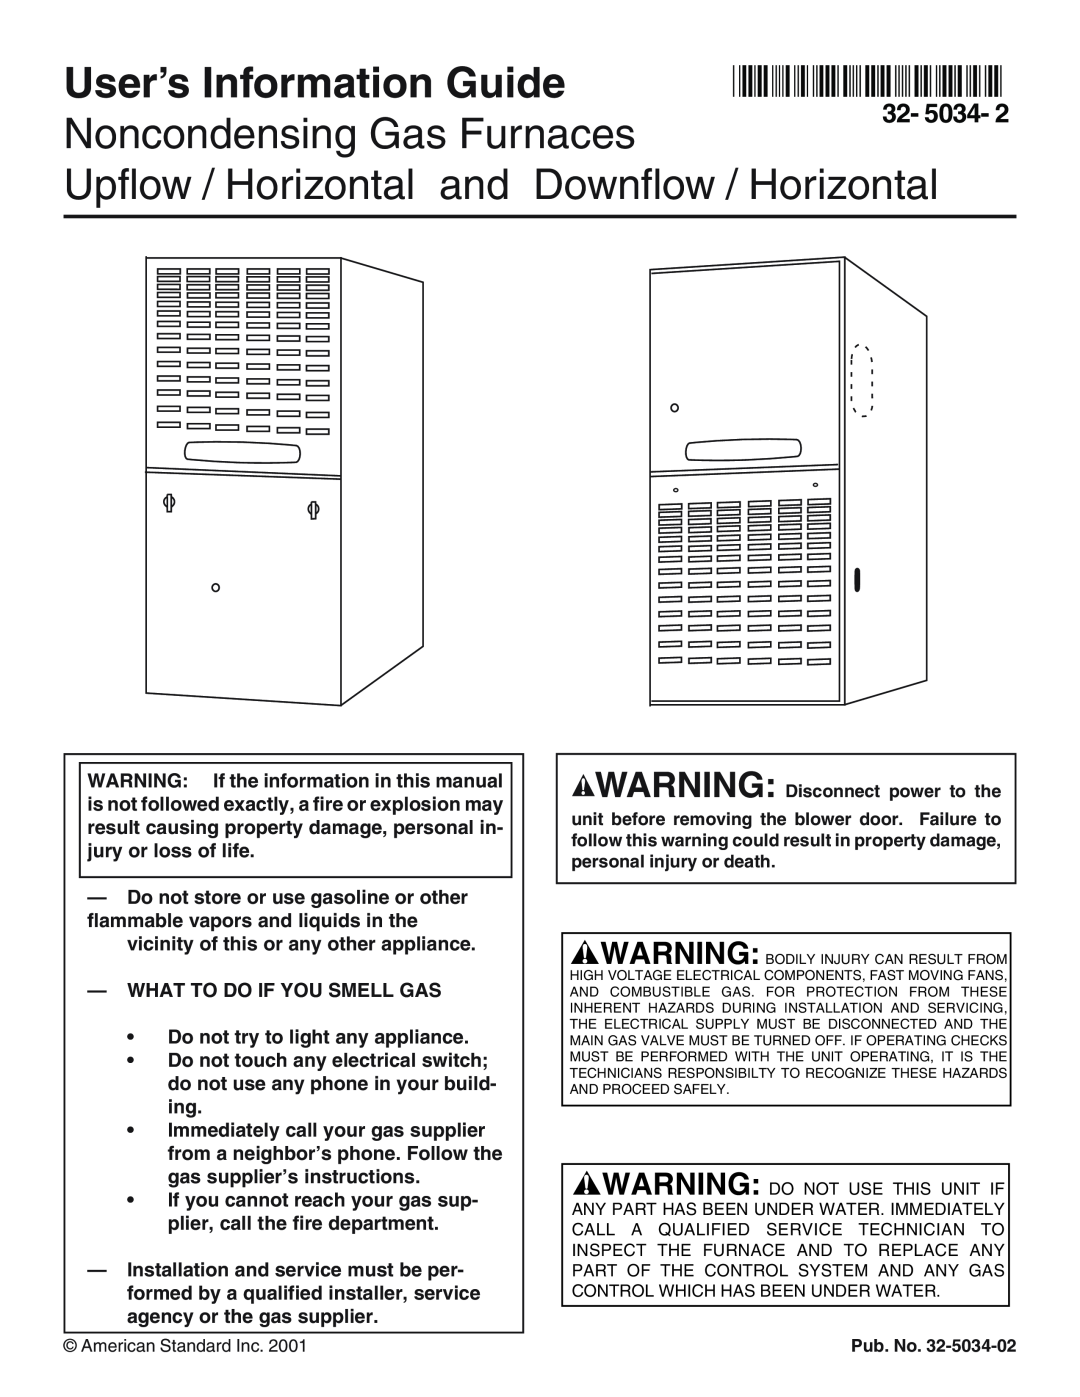 American Standard Noncondensing Gas Furnaces manual User’s Information Guide, Upflow / Horizontal and Downflow / Horizontal 